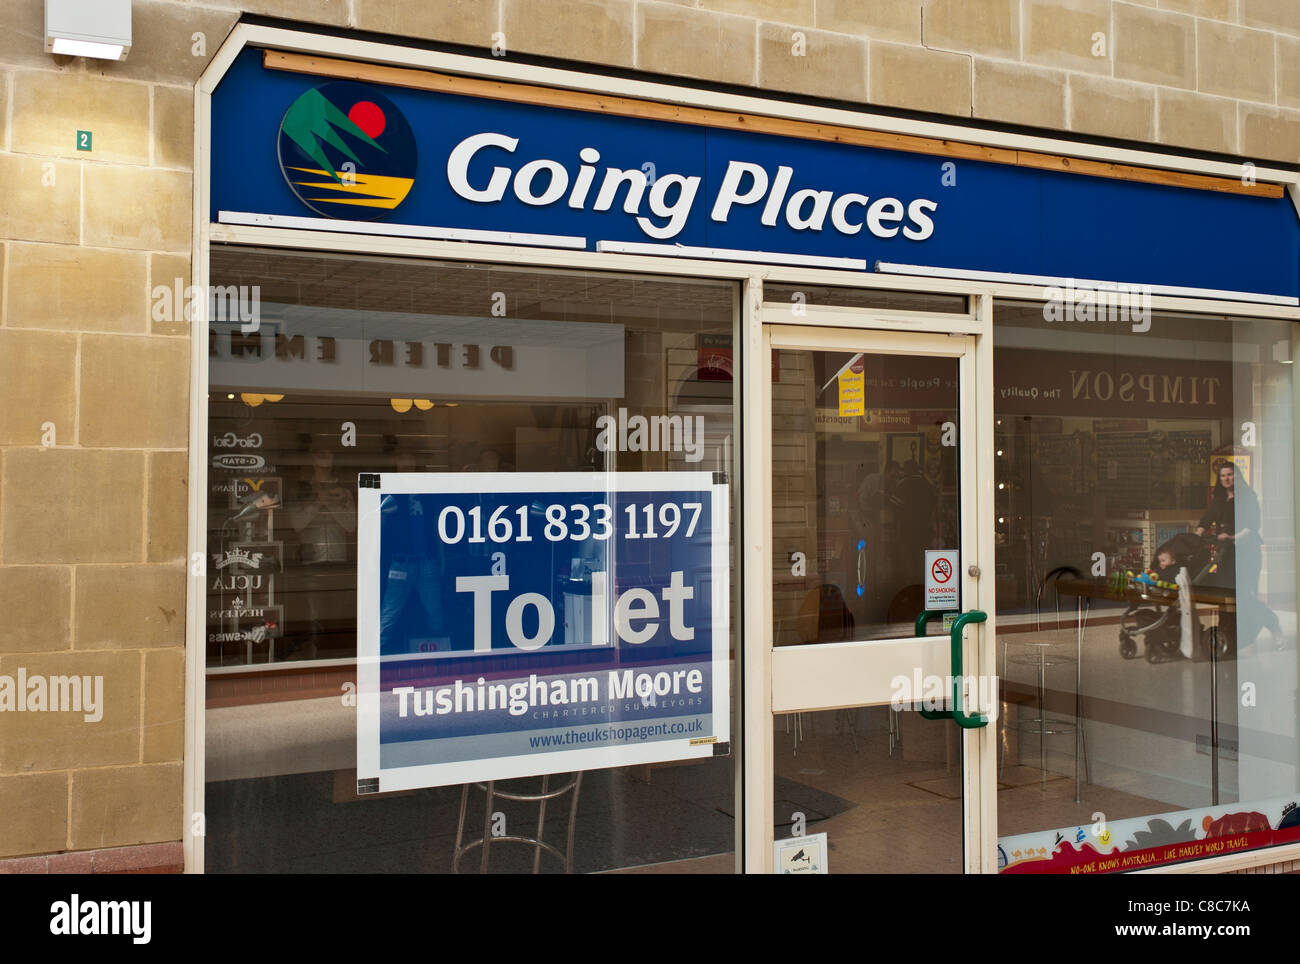 GOING PLACES travel agency shop TO LET Stock Photo